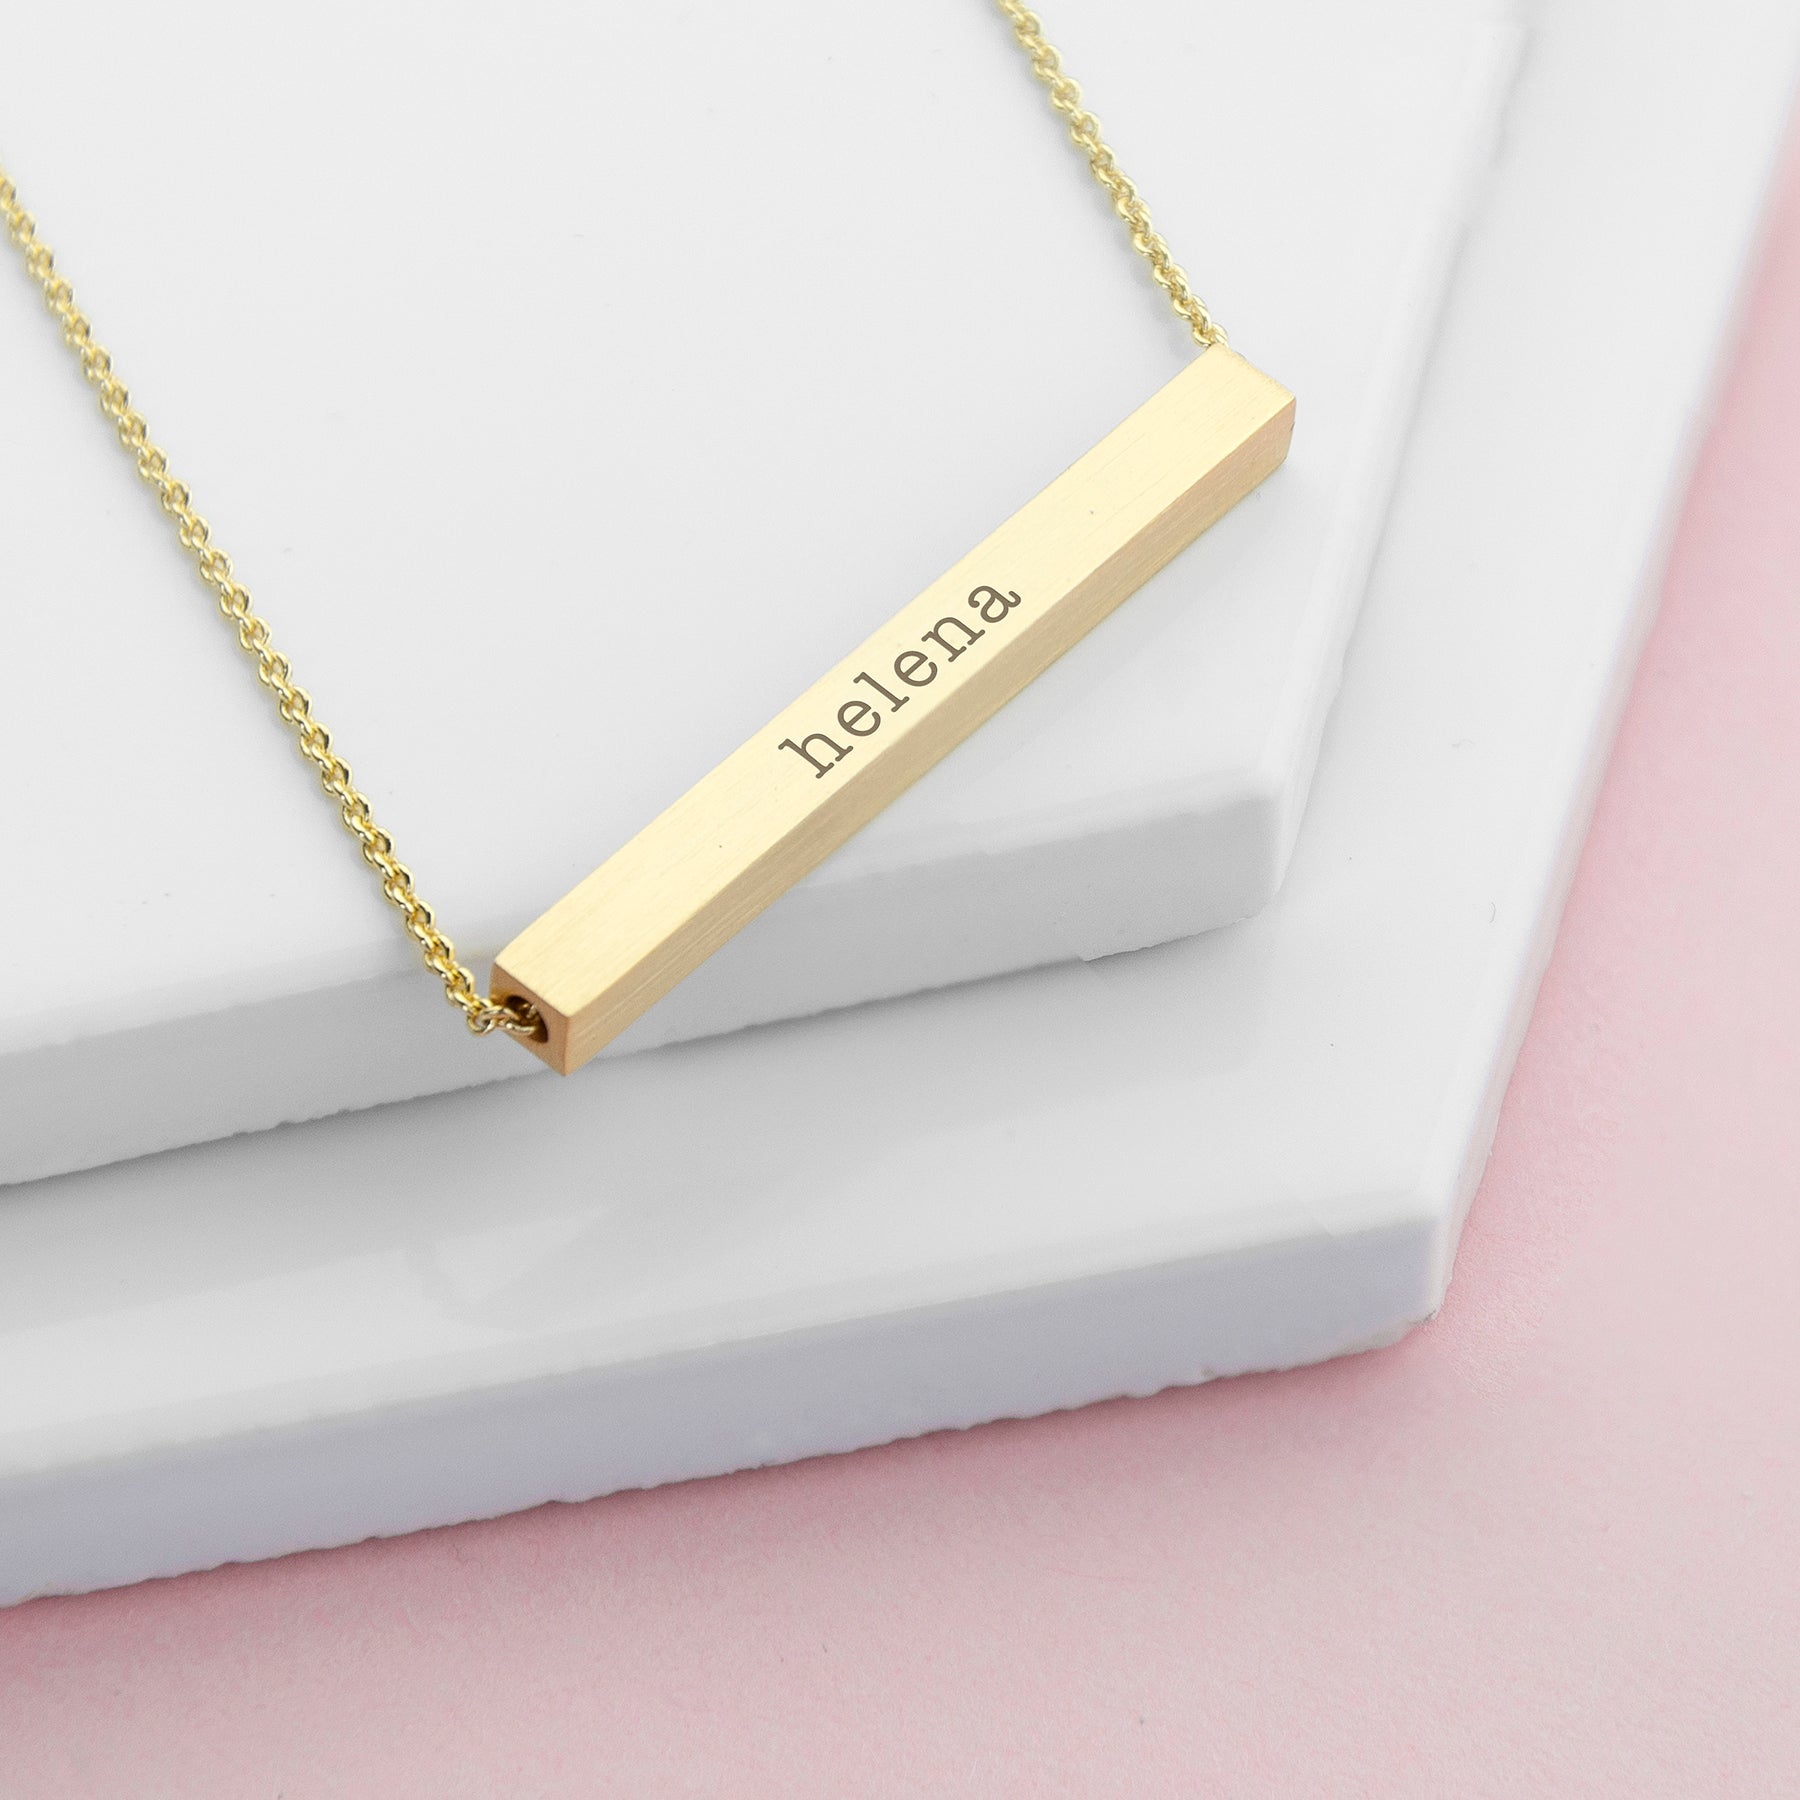 Personalized Necklaces - Personalized Horizontal Bar Necklace 